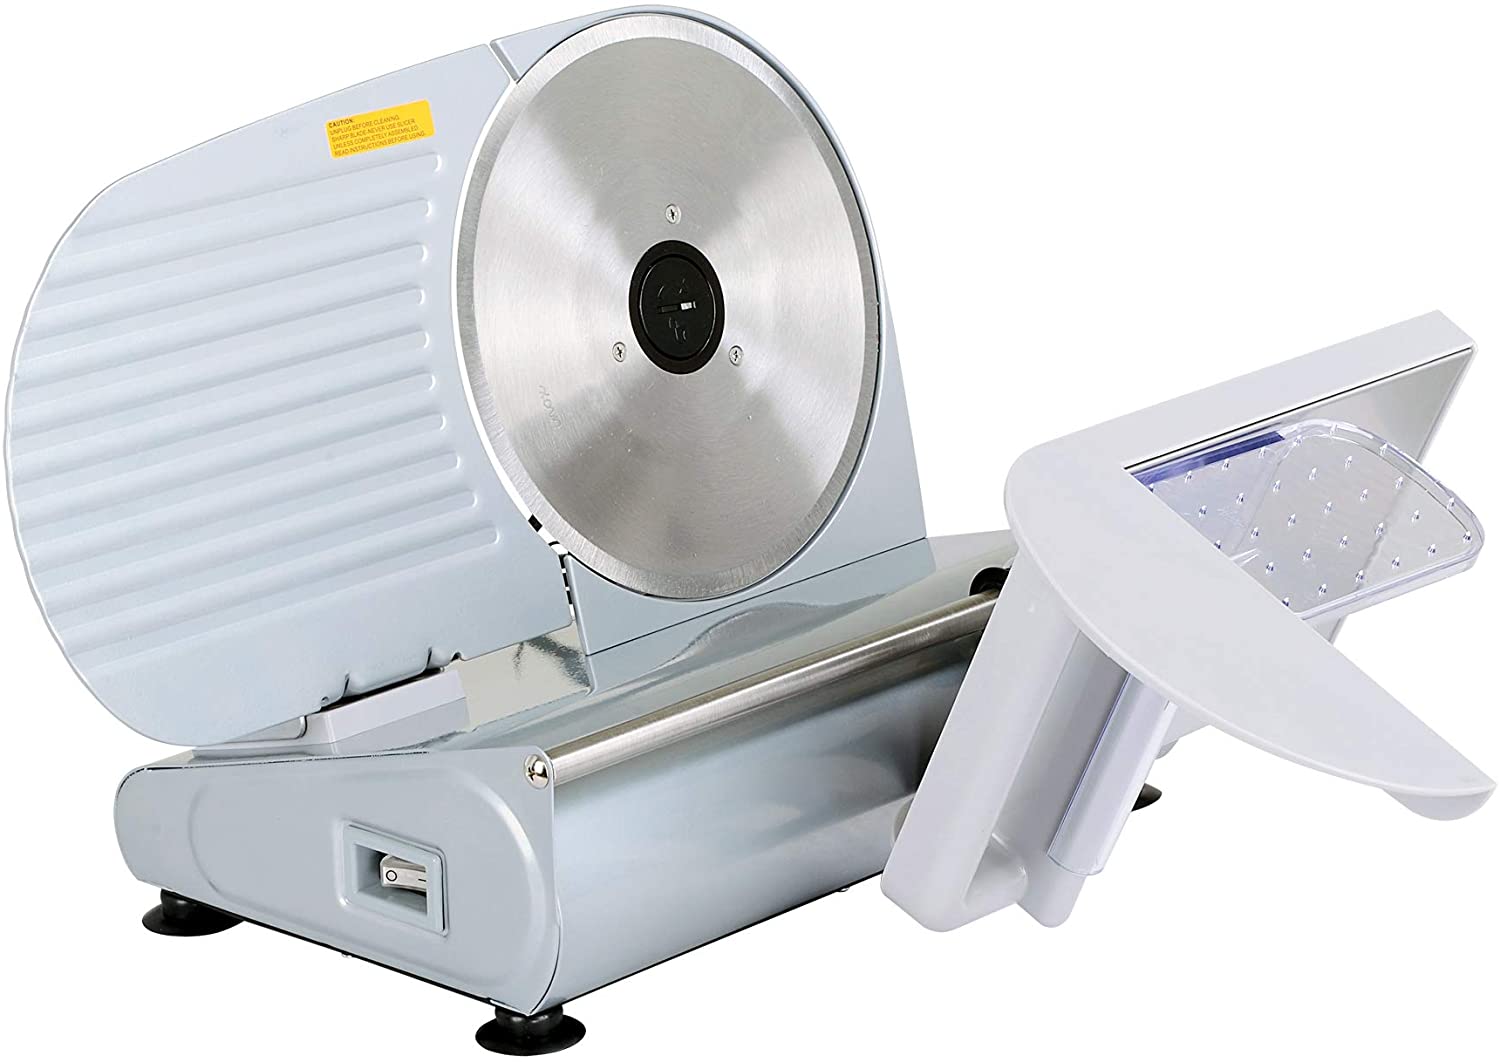 Our Kitchener Pro Commercial Deli, Meat, Cheese & Bread Slicer is built of premium coated steel & die-cast aluminum, safe grade food plastic & stainless steel carriage surface (protects from rust). This slicer is a belt driven Electric powered 230V 150 Watt 50Hz motor, including a: 7.5" (190mm) Ham/Salami Blade, Adjustable Thickness Control Knob capable of slicing a wide variety of foods from delicious deli thin to 5/8" carving board style thick meats.